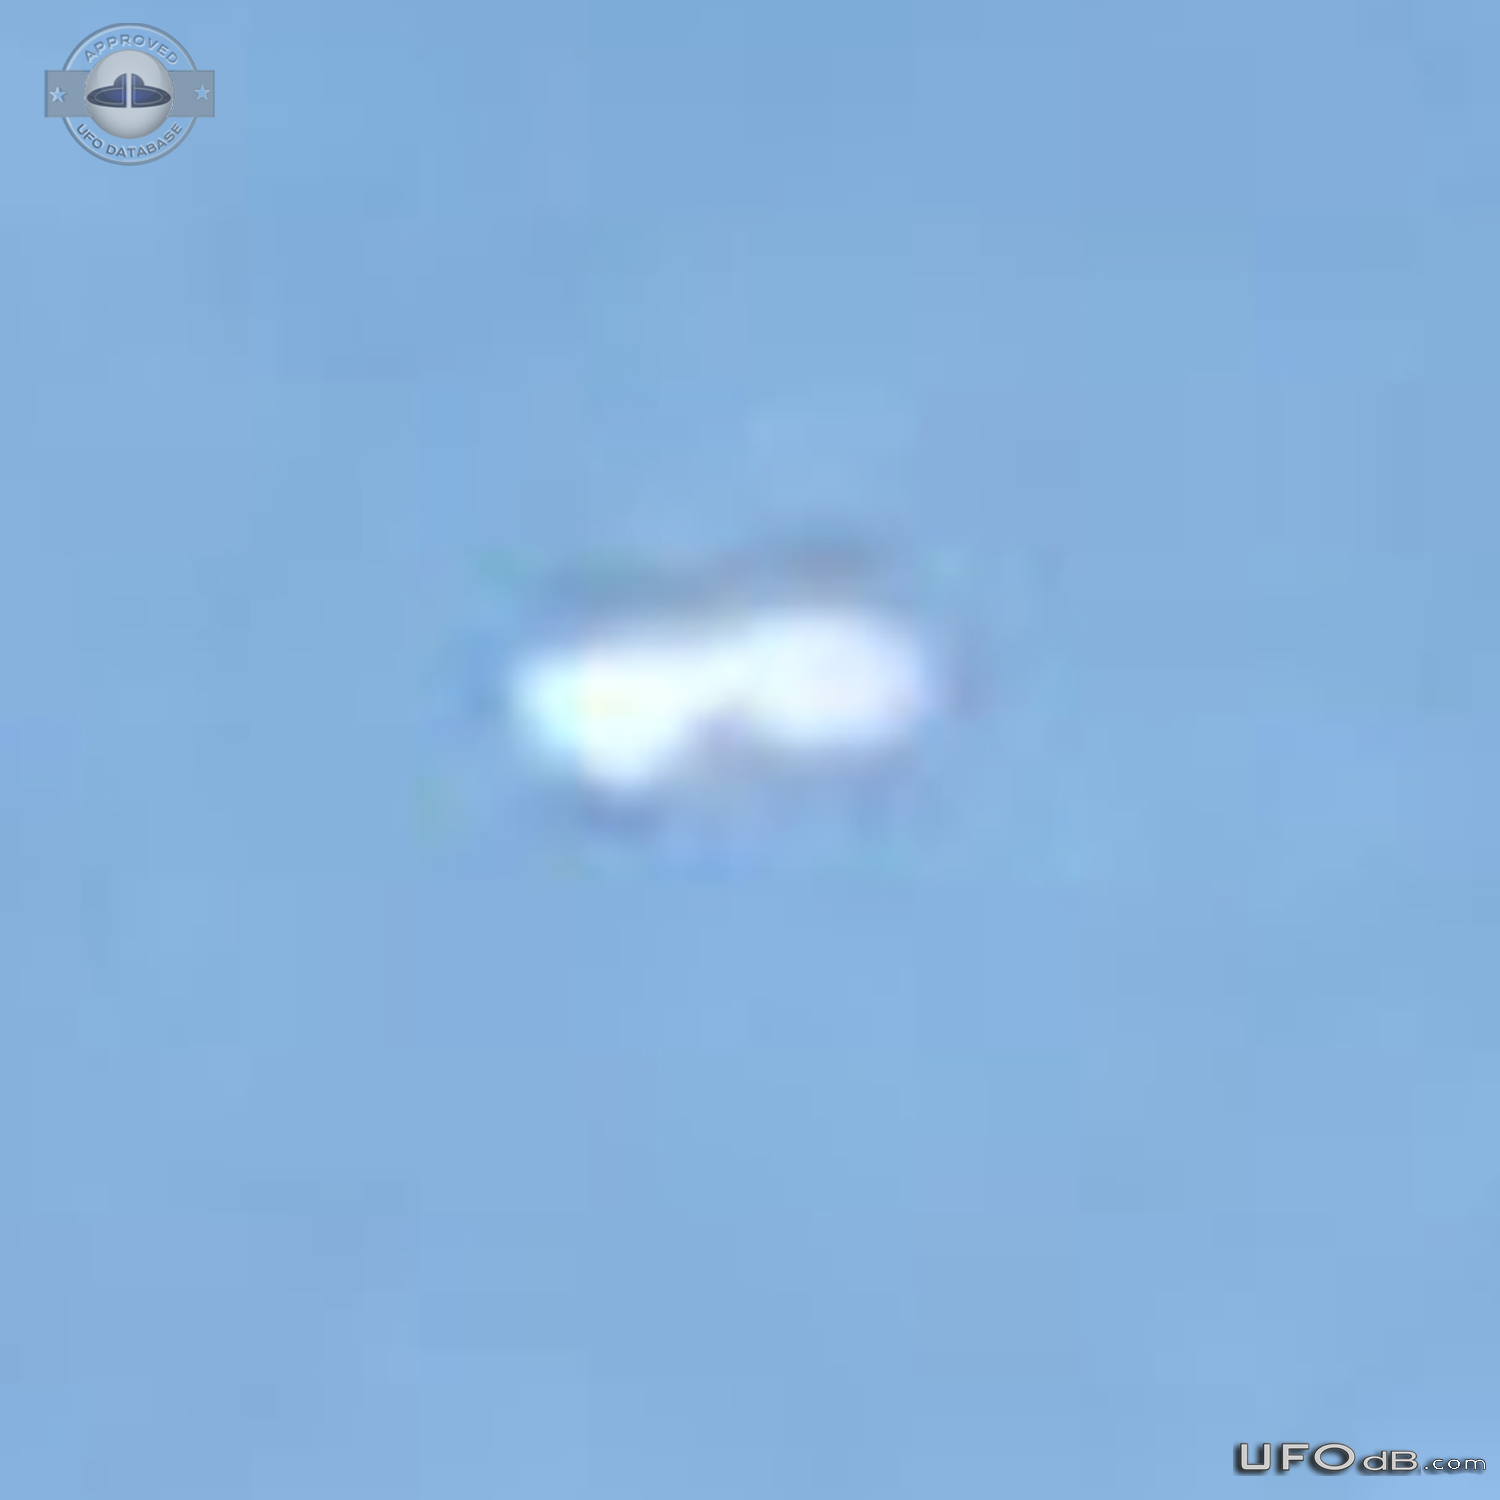 I saw a shiny cigar shaped Ufo in descent through the clouds - Tenness UFO Picture #795-5